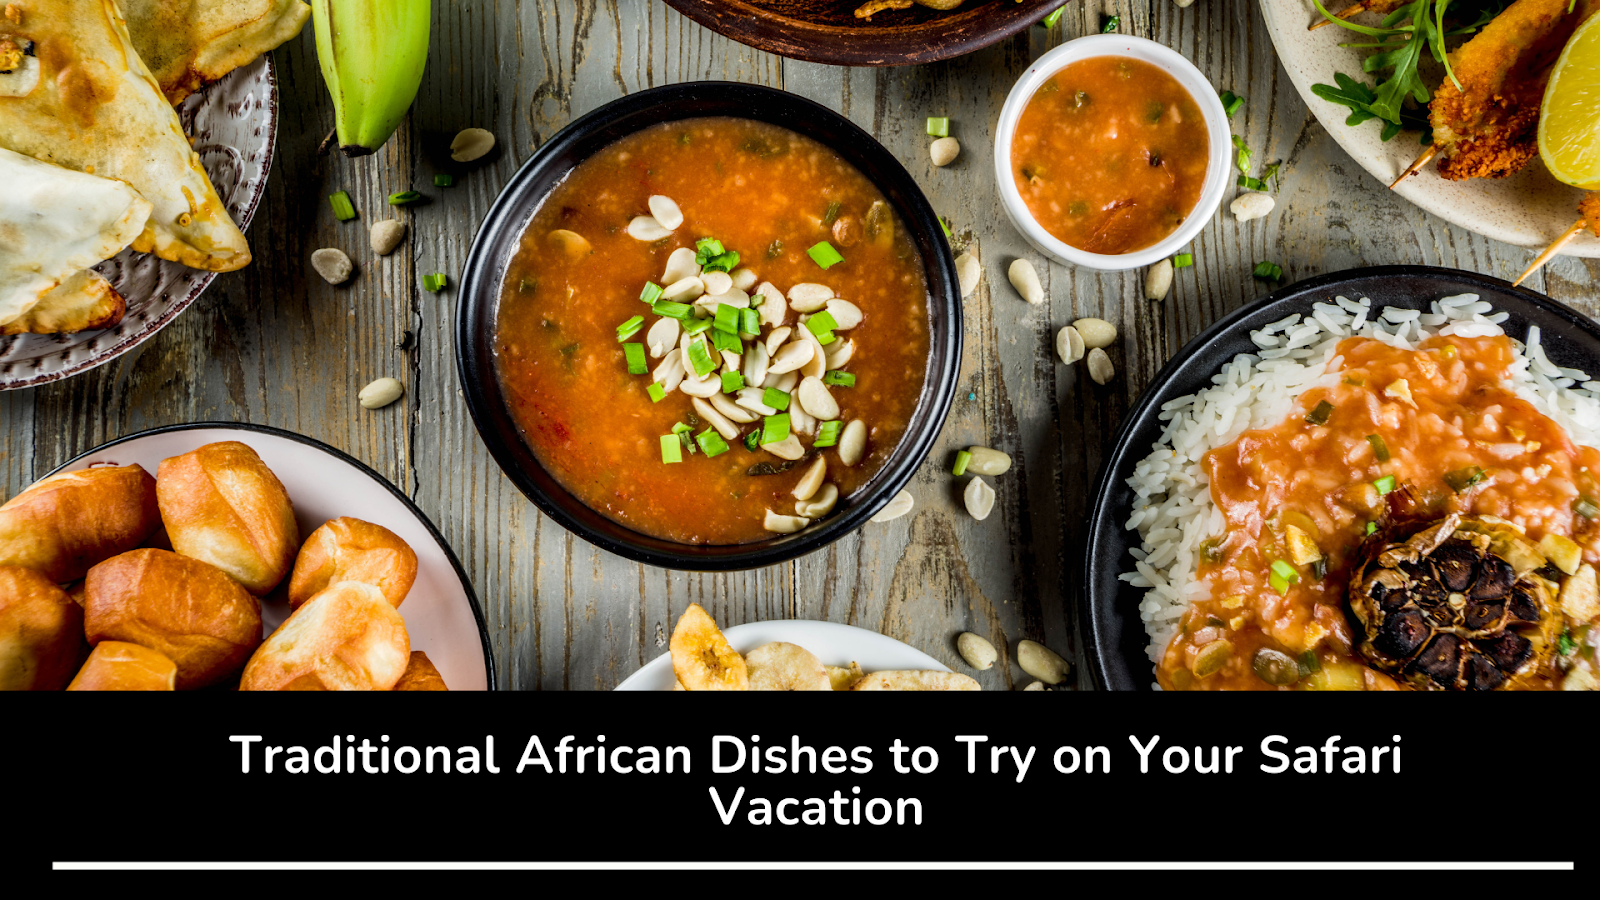 Traditional African Dishes to Try on Your Safari Vacation